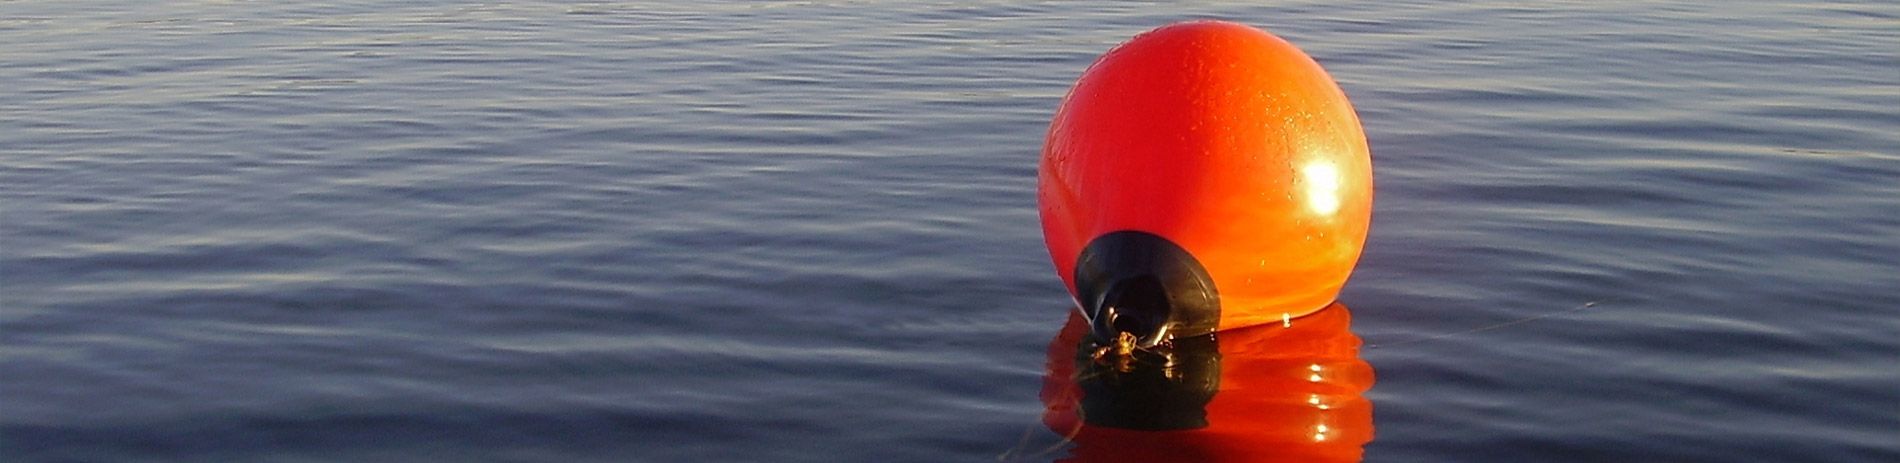 a red buoy is floating on top of a body of water .